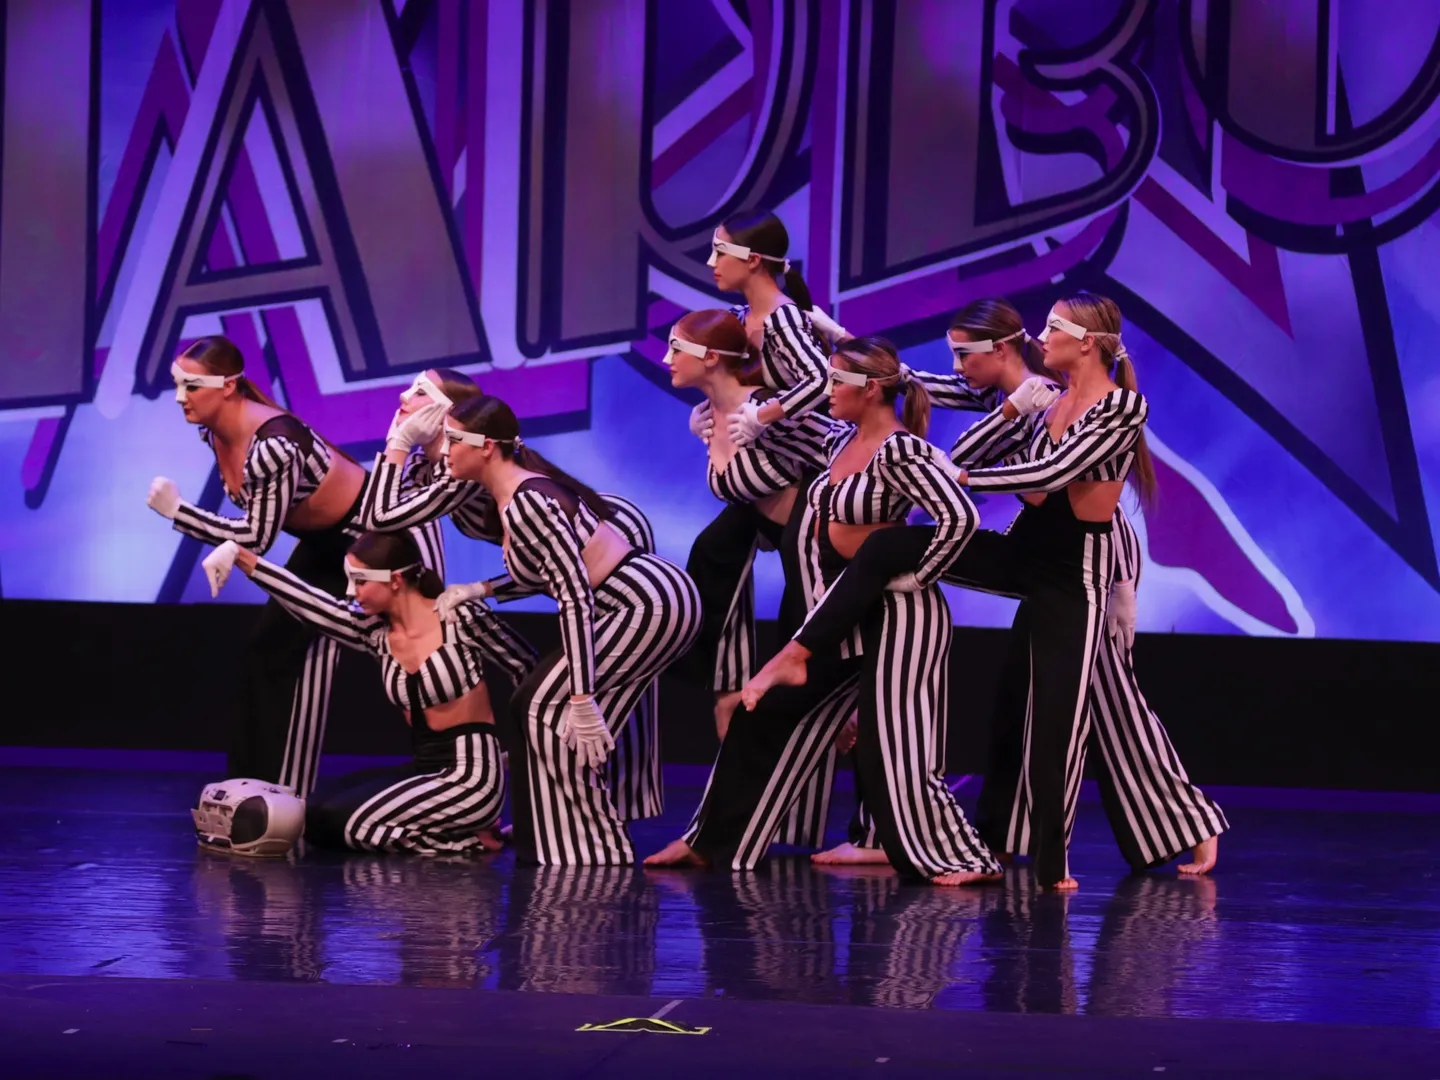 A group of dancers in striped outfits on stage.